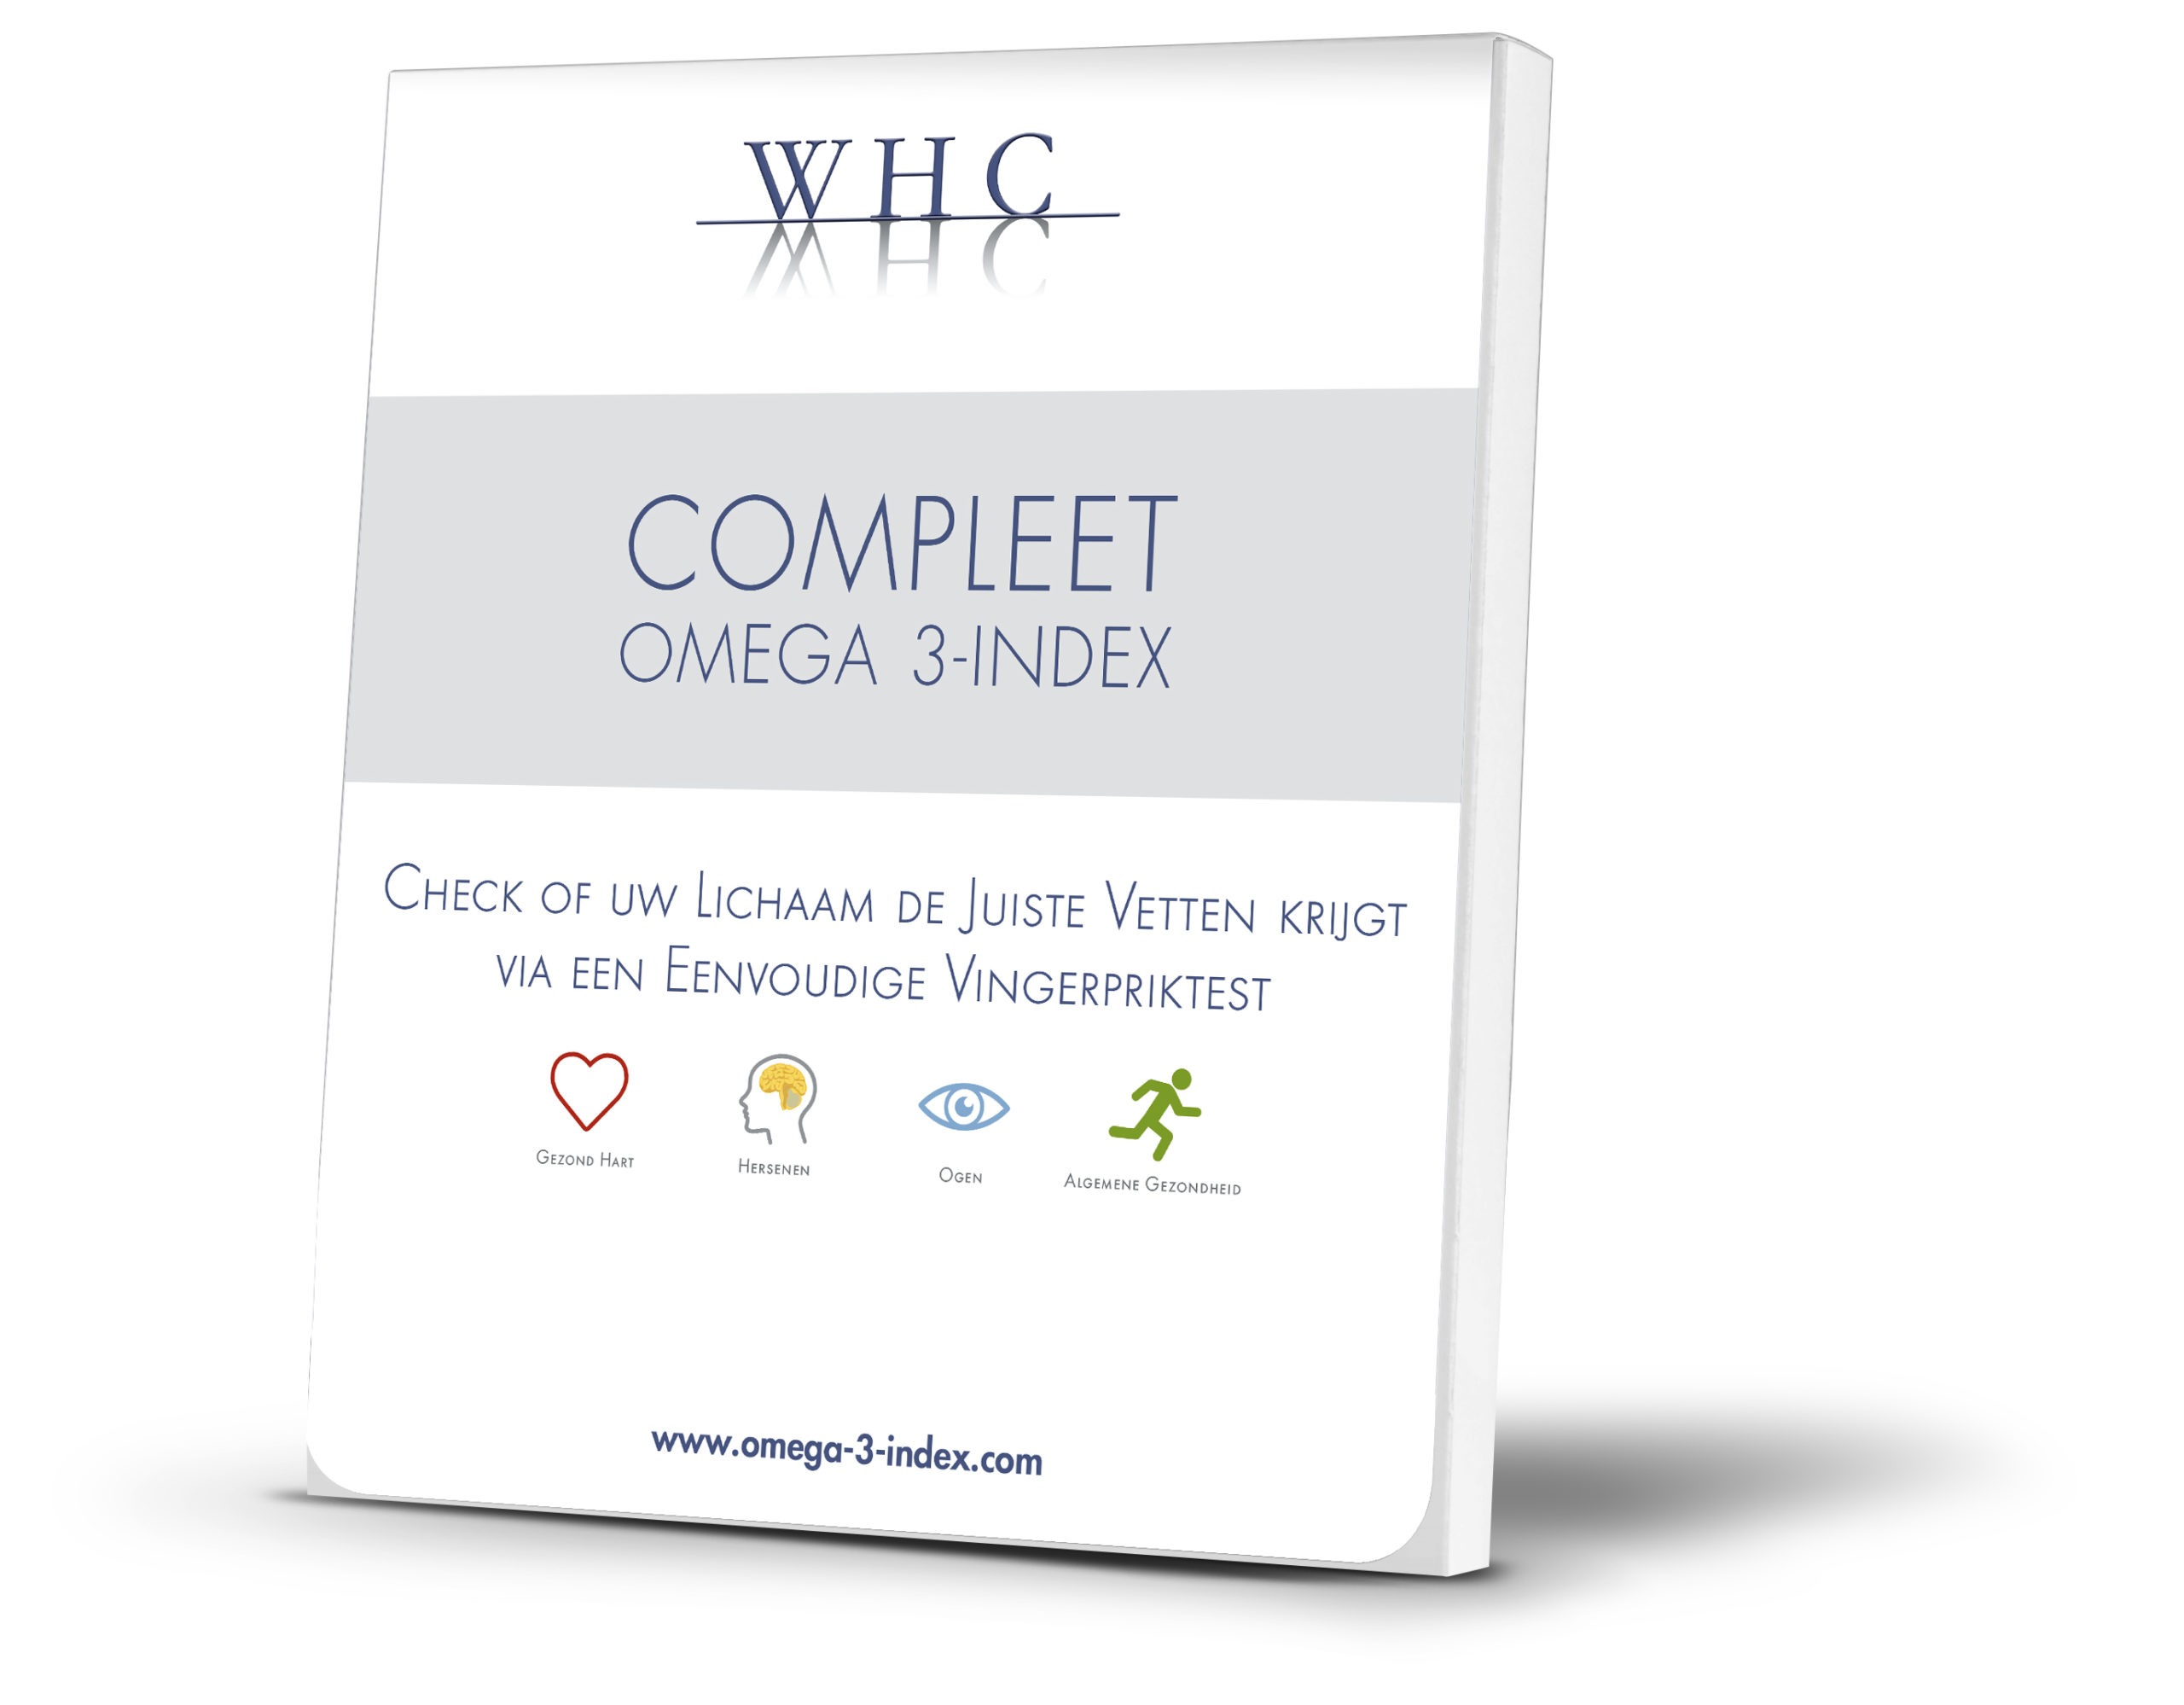 Omega3index_WHC_NL_Compleet-scaled